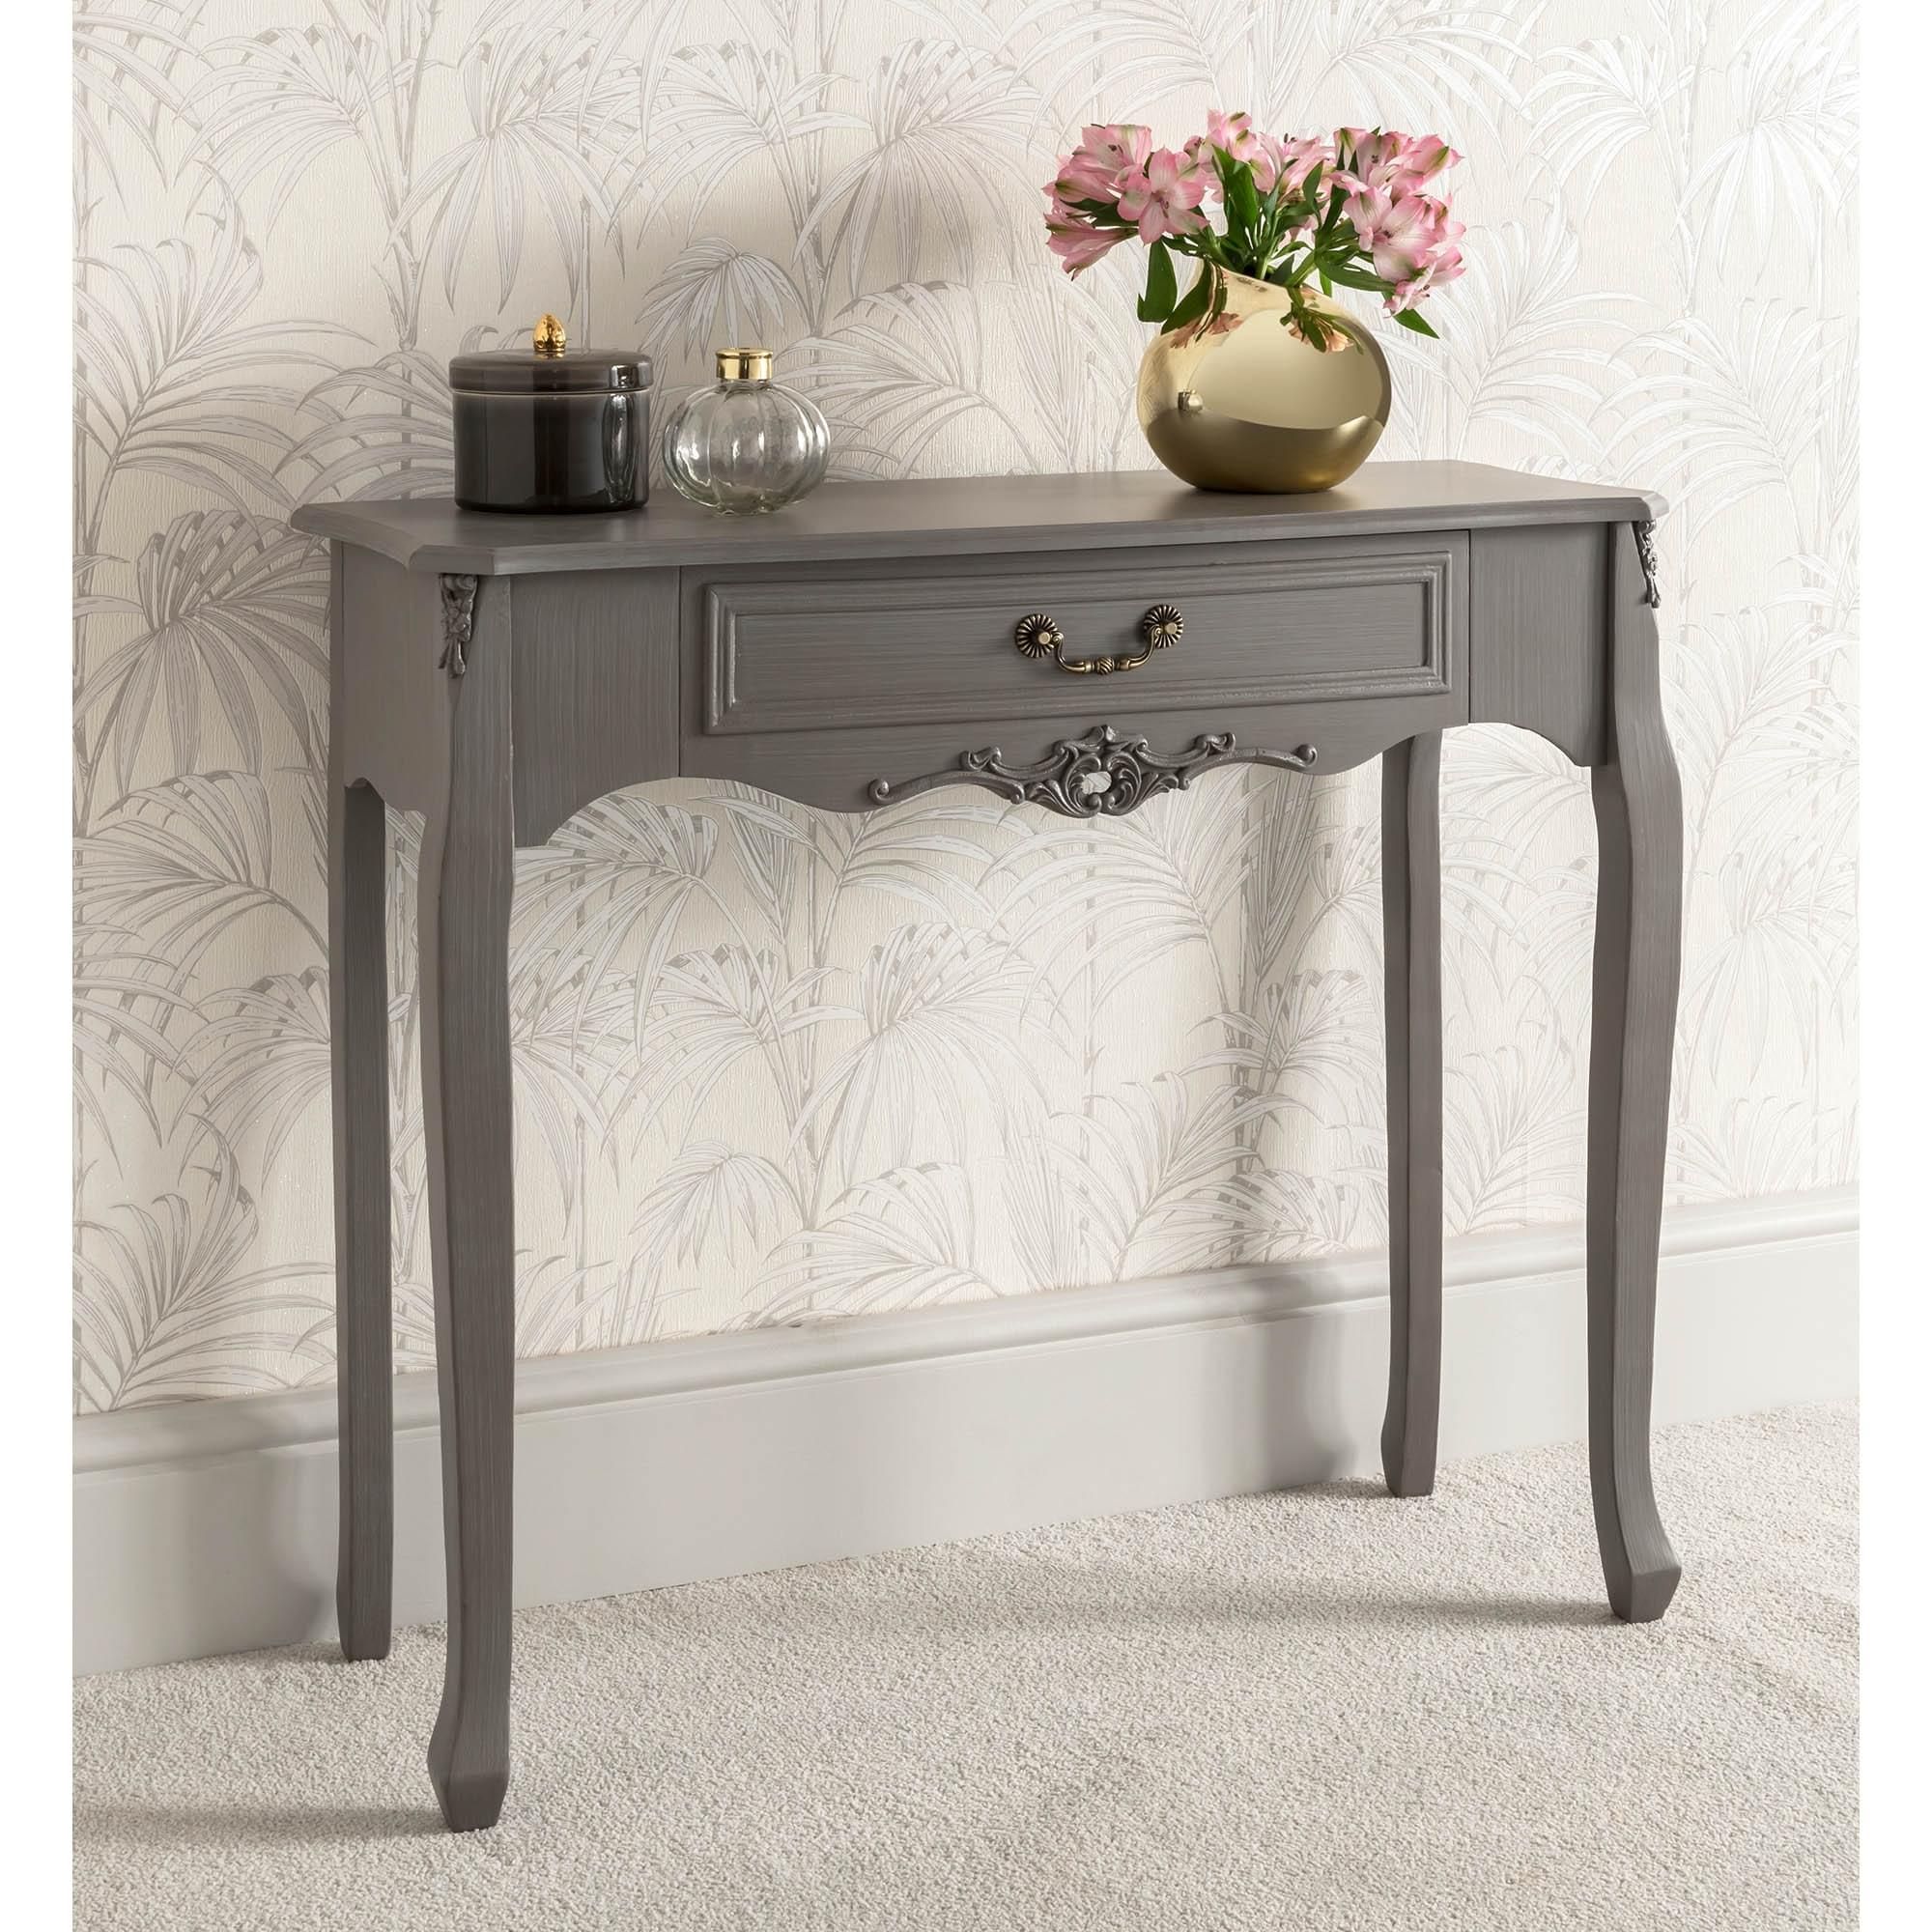 Grey 1 Drawer Antique French Style Console Table | Shabby Inside Antique White Black Console Tables (View 8 of 20)